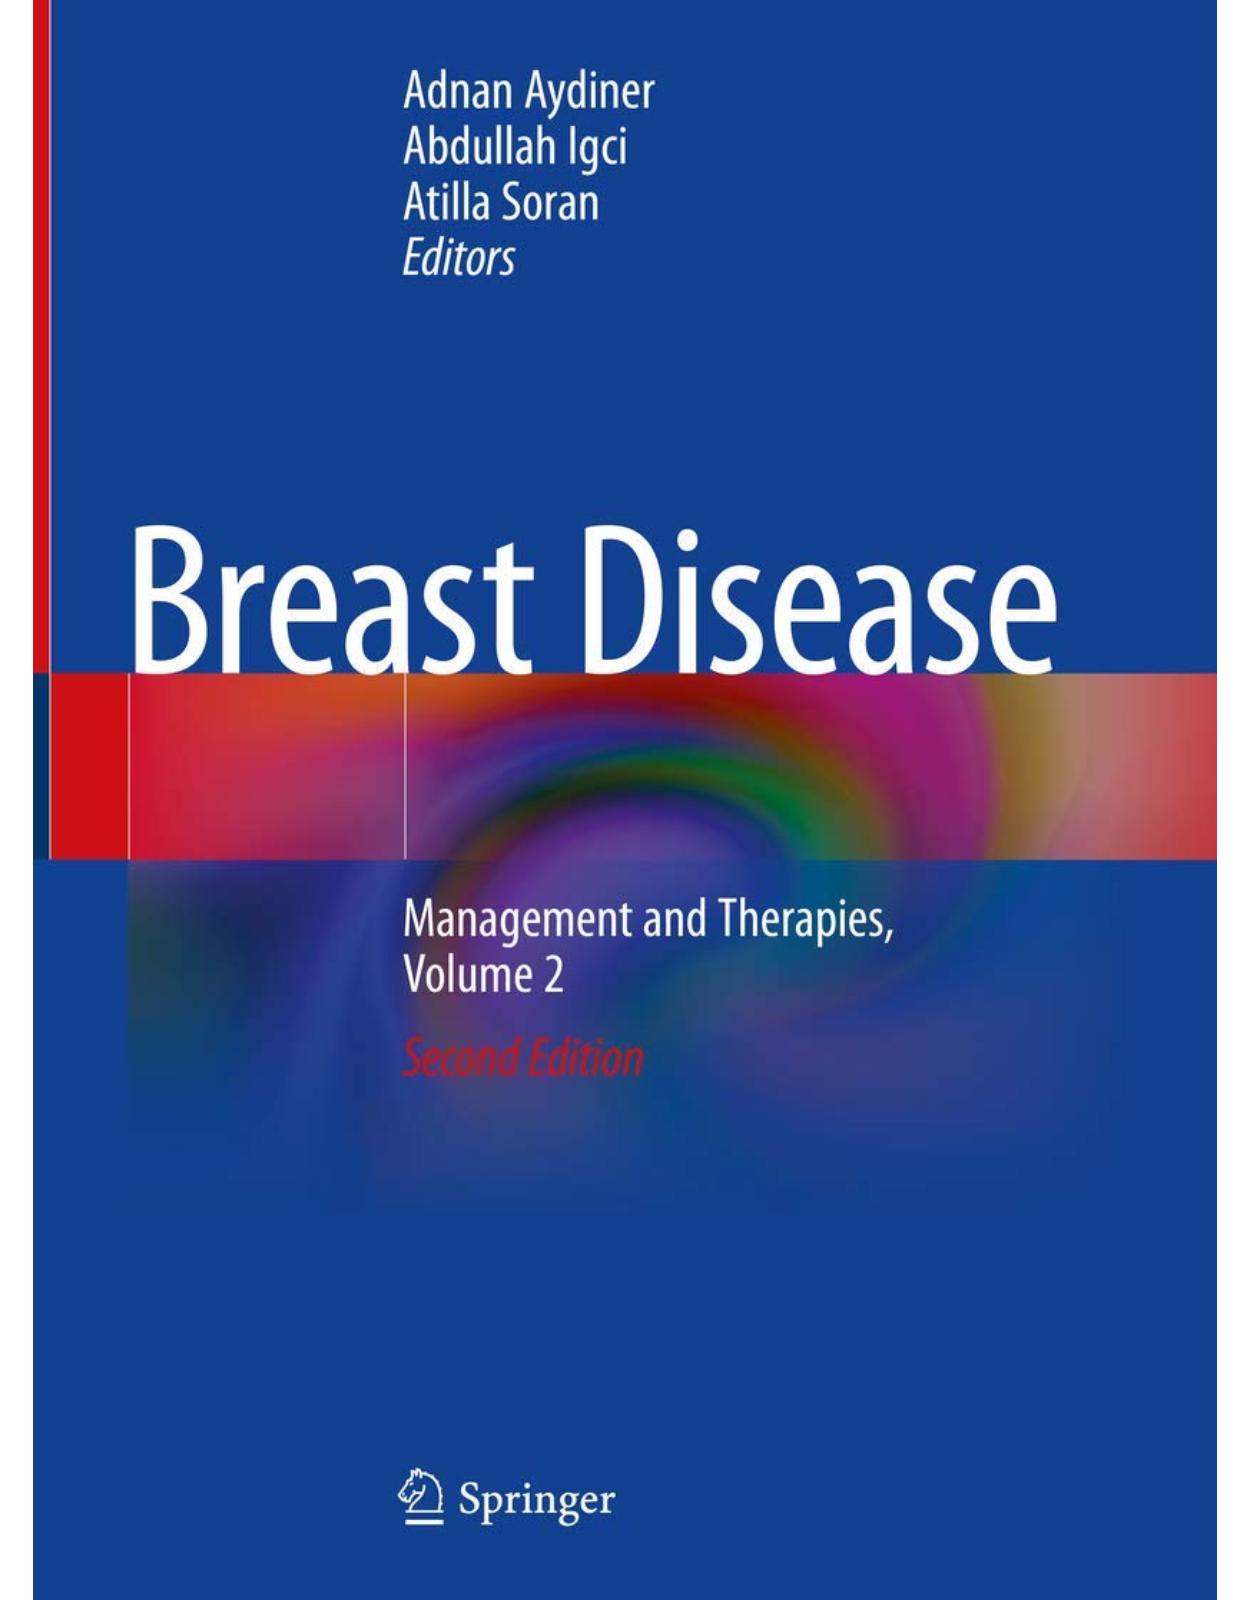 Breast Disease. Management and Therapies, Volume 2